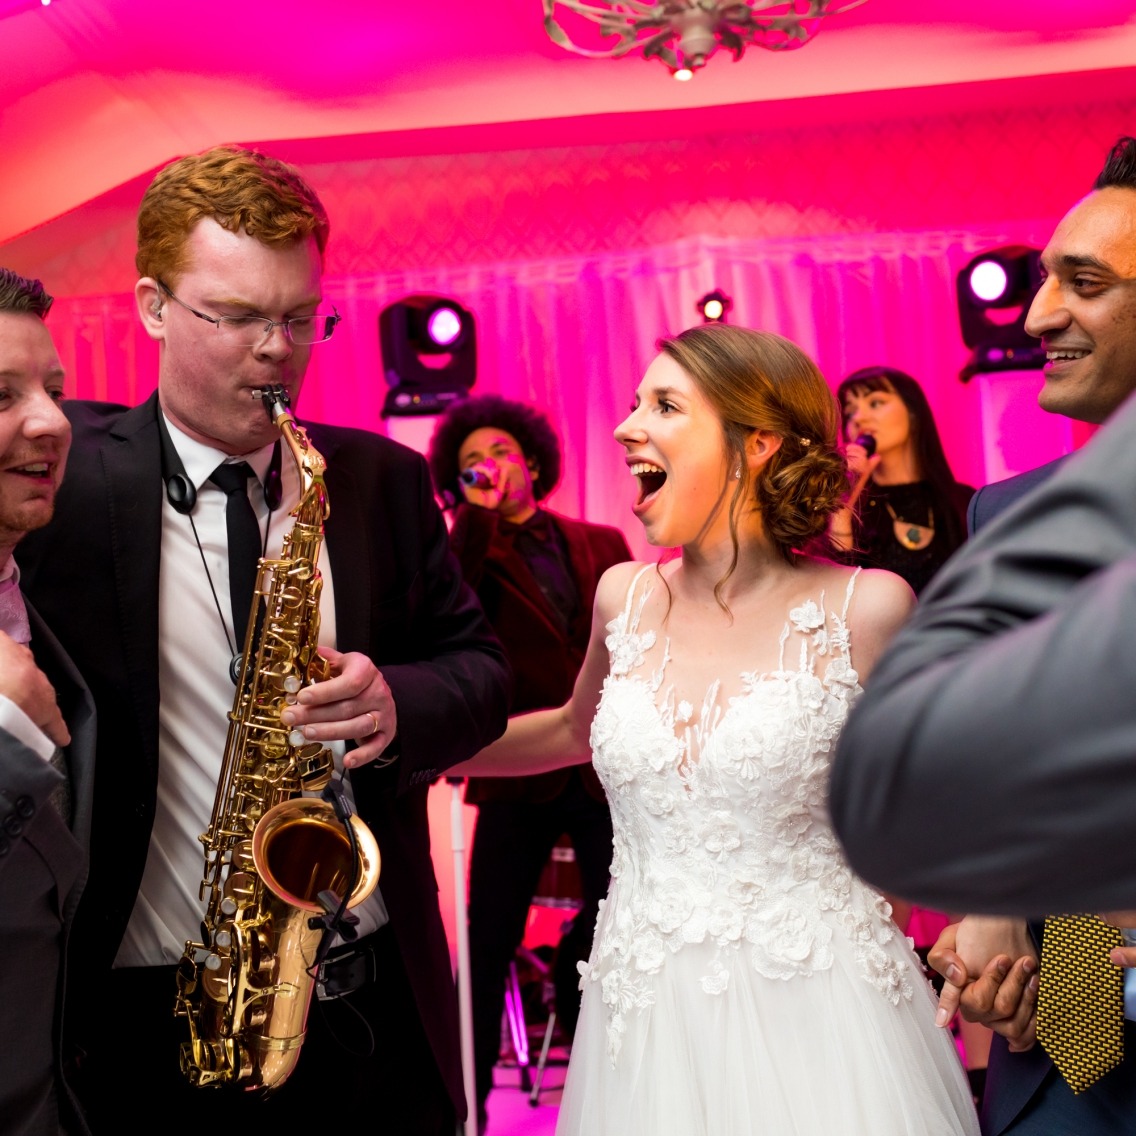 Pennyhill Park Wedding Band